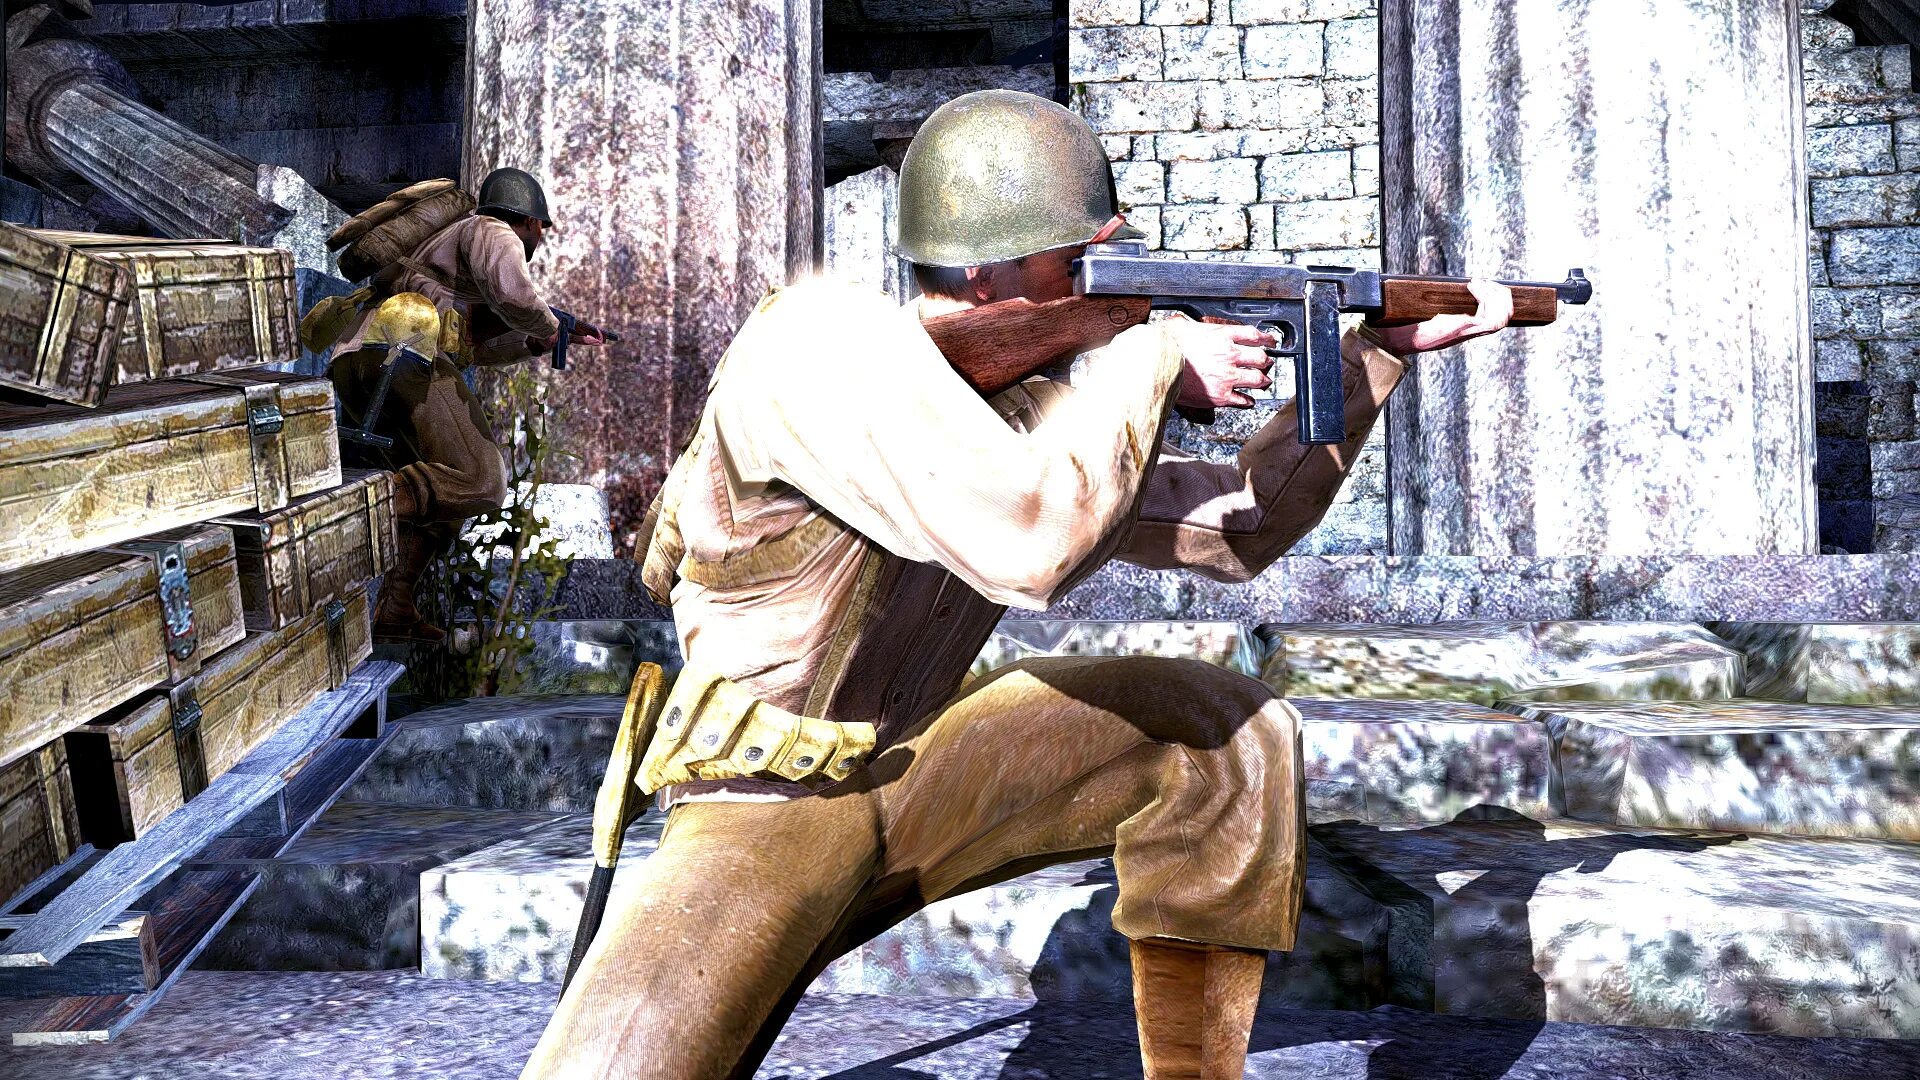 1 30 games. Medal of Honor Airborne 2. Medal of Honor Airborne. Medal of Honor Airborne Waffen SS. Medal of Honor ww2.